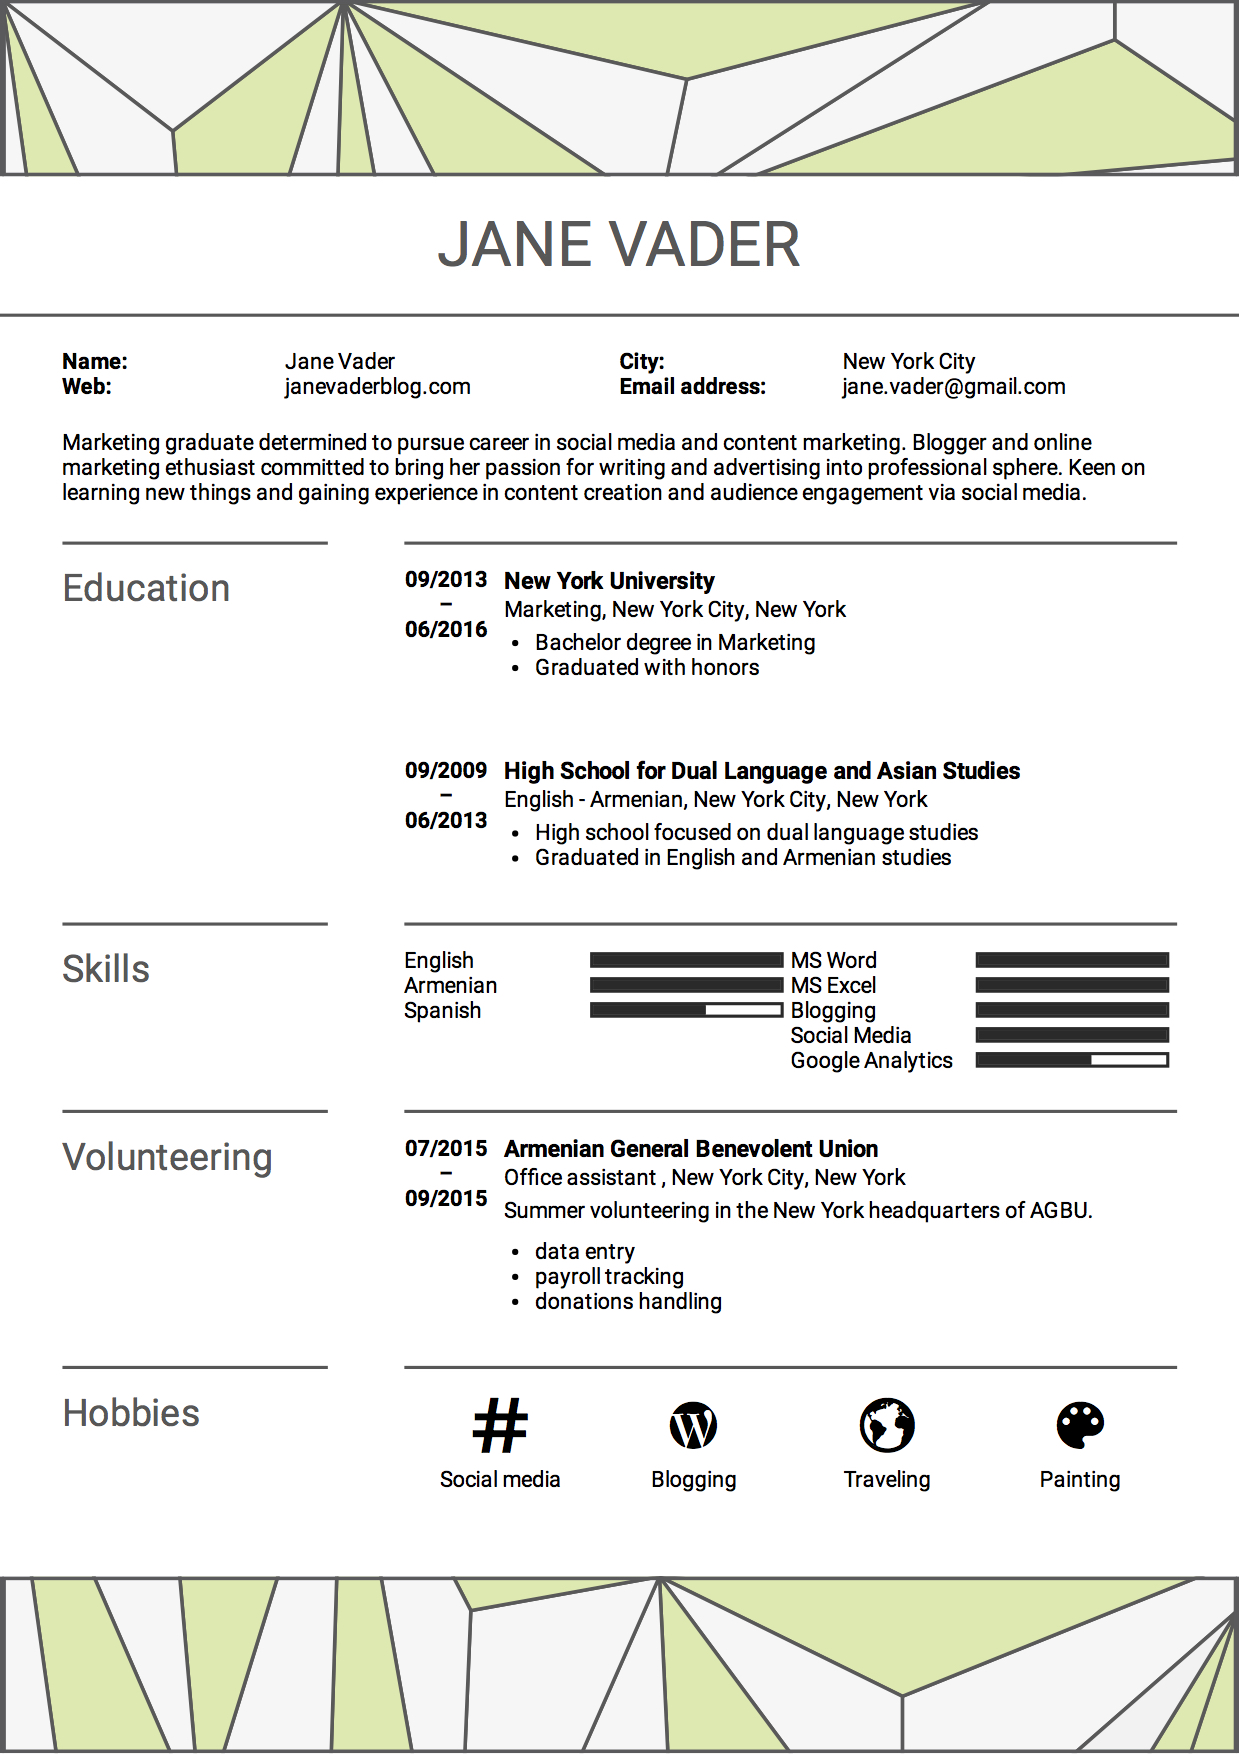 How To Write A Good Resume Jane Vader Cv how to write a good resume|wikiresume.com